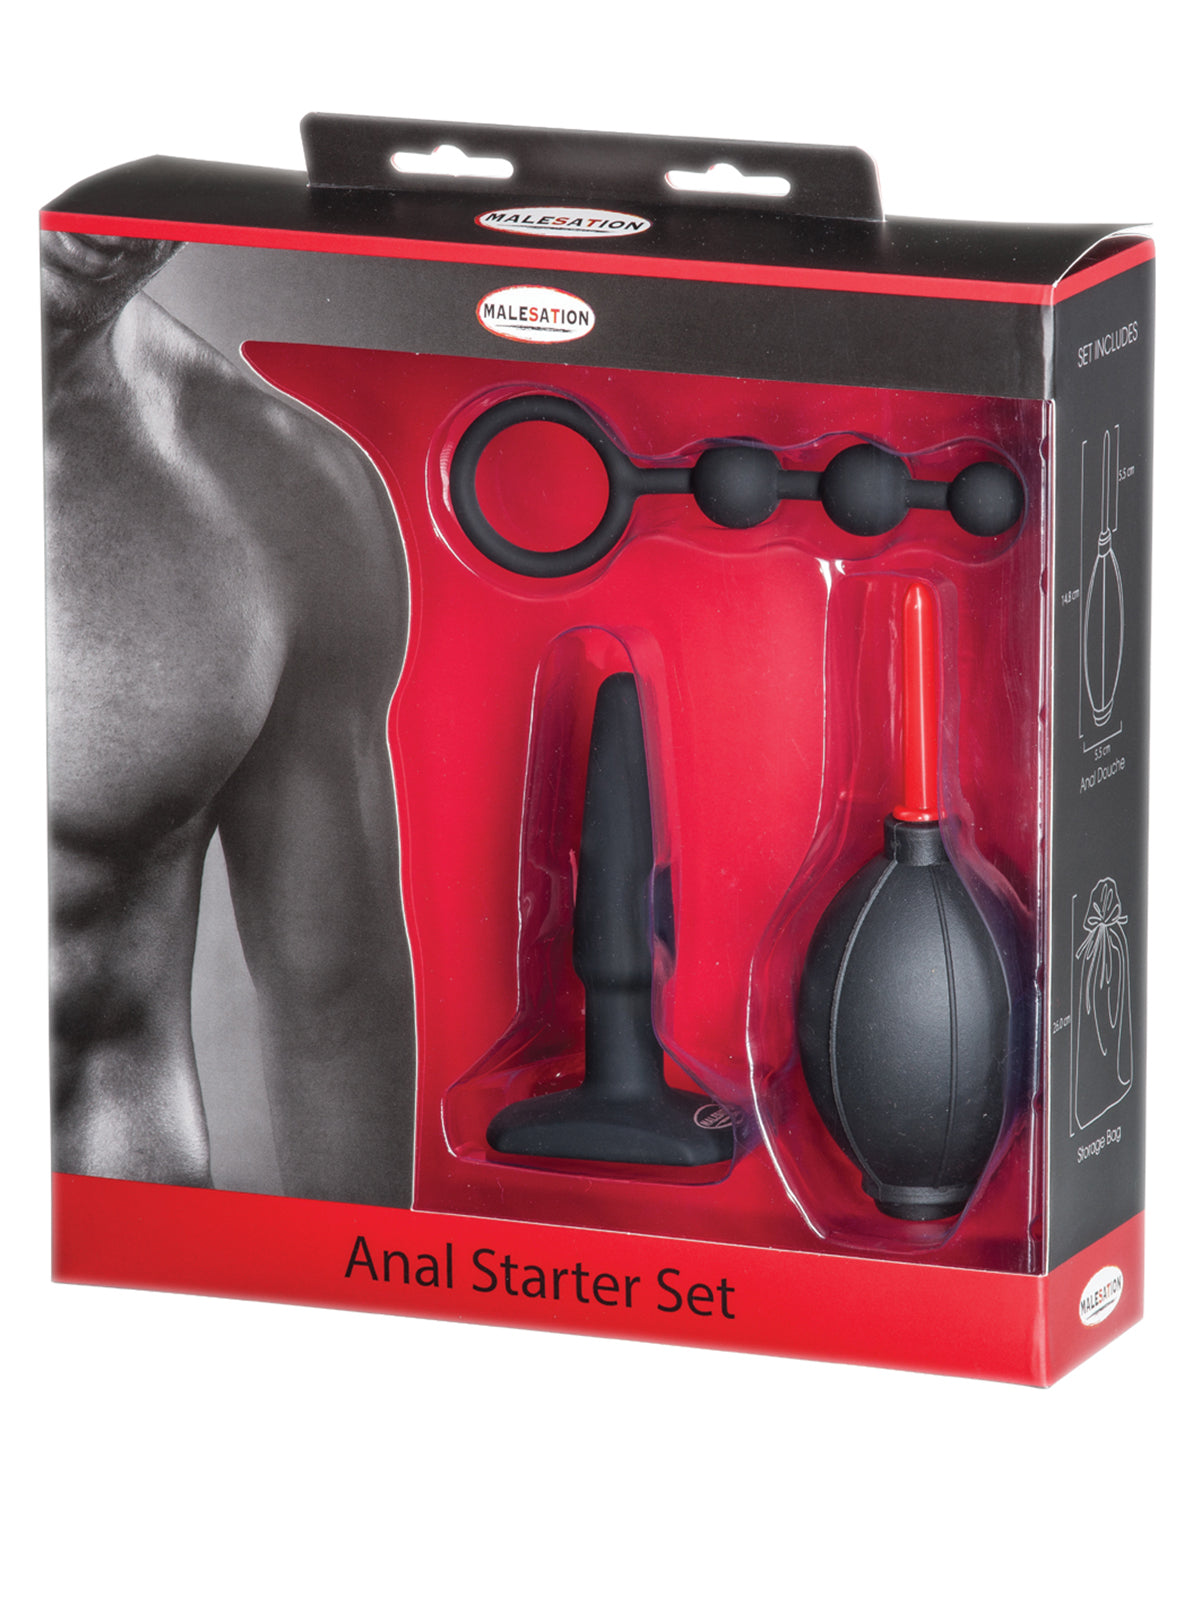 Beginners Anal Set Malesation Anal Toys 